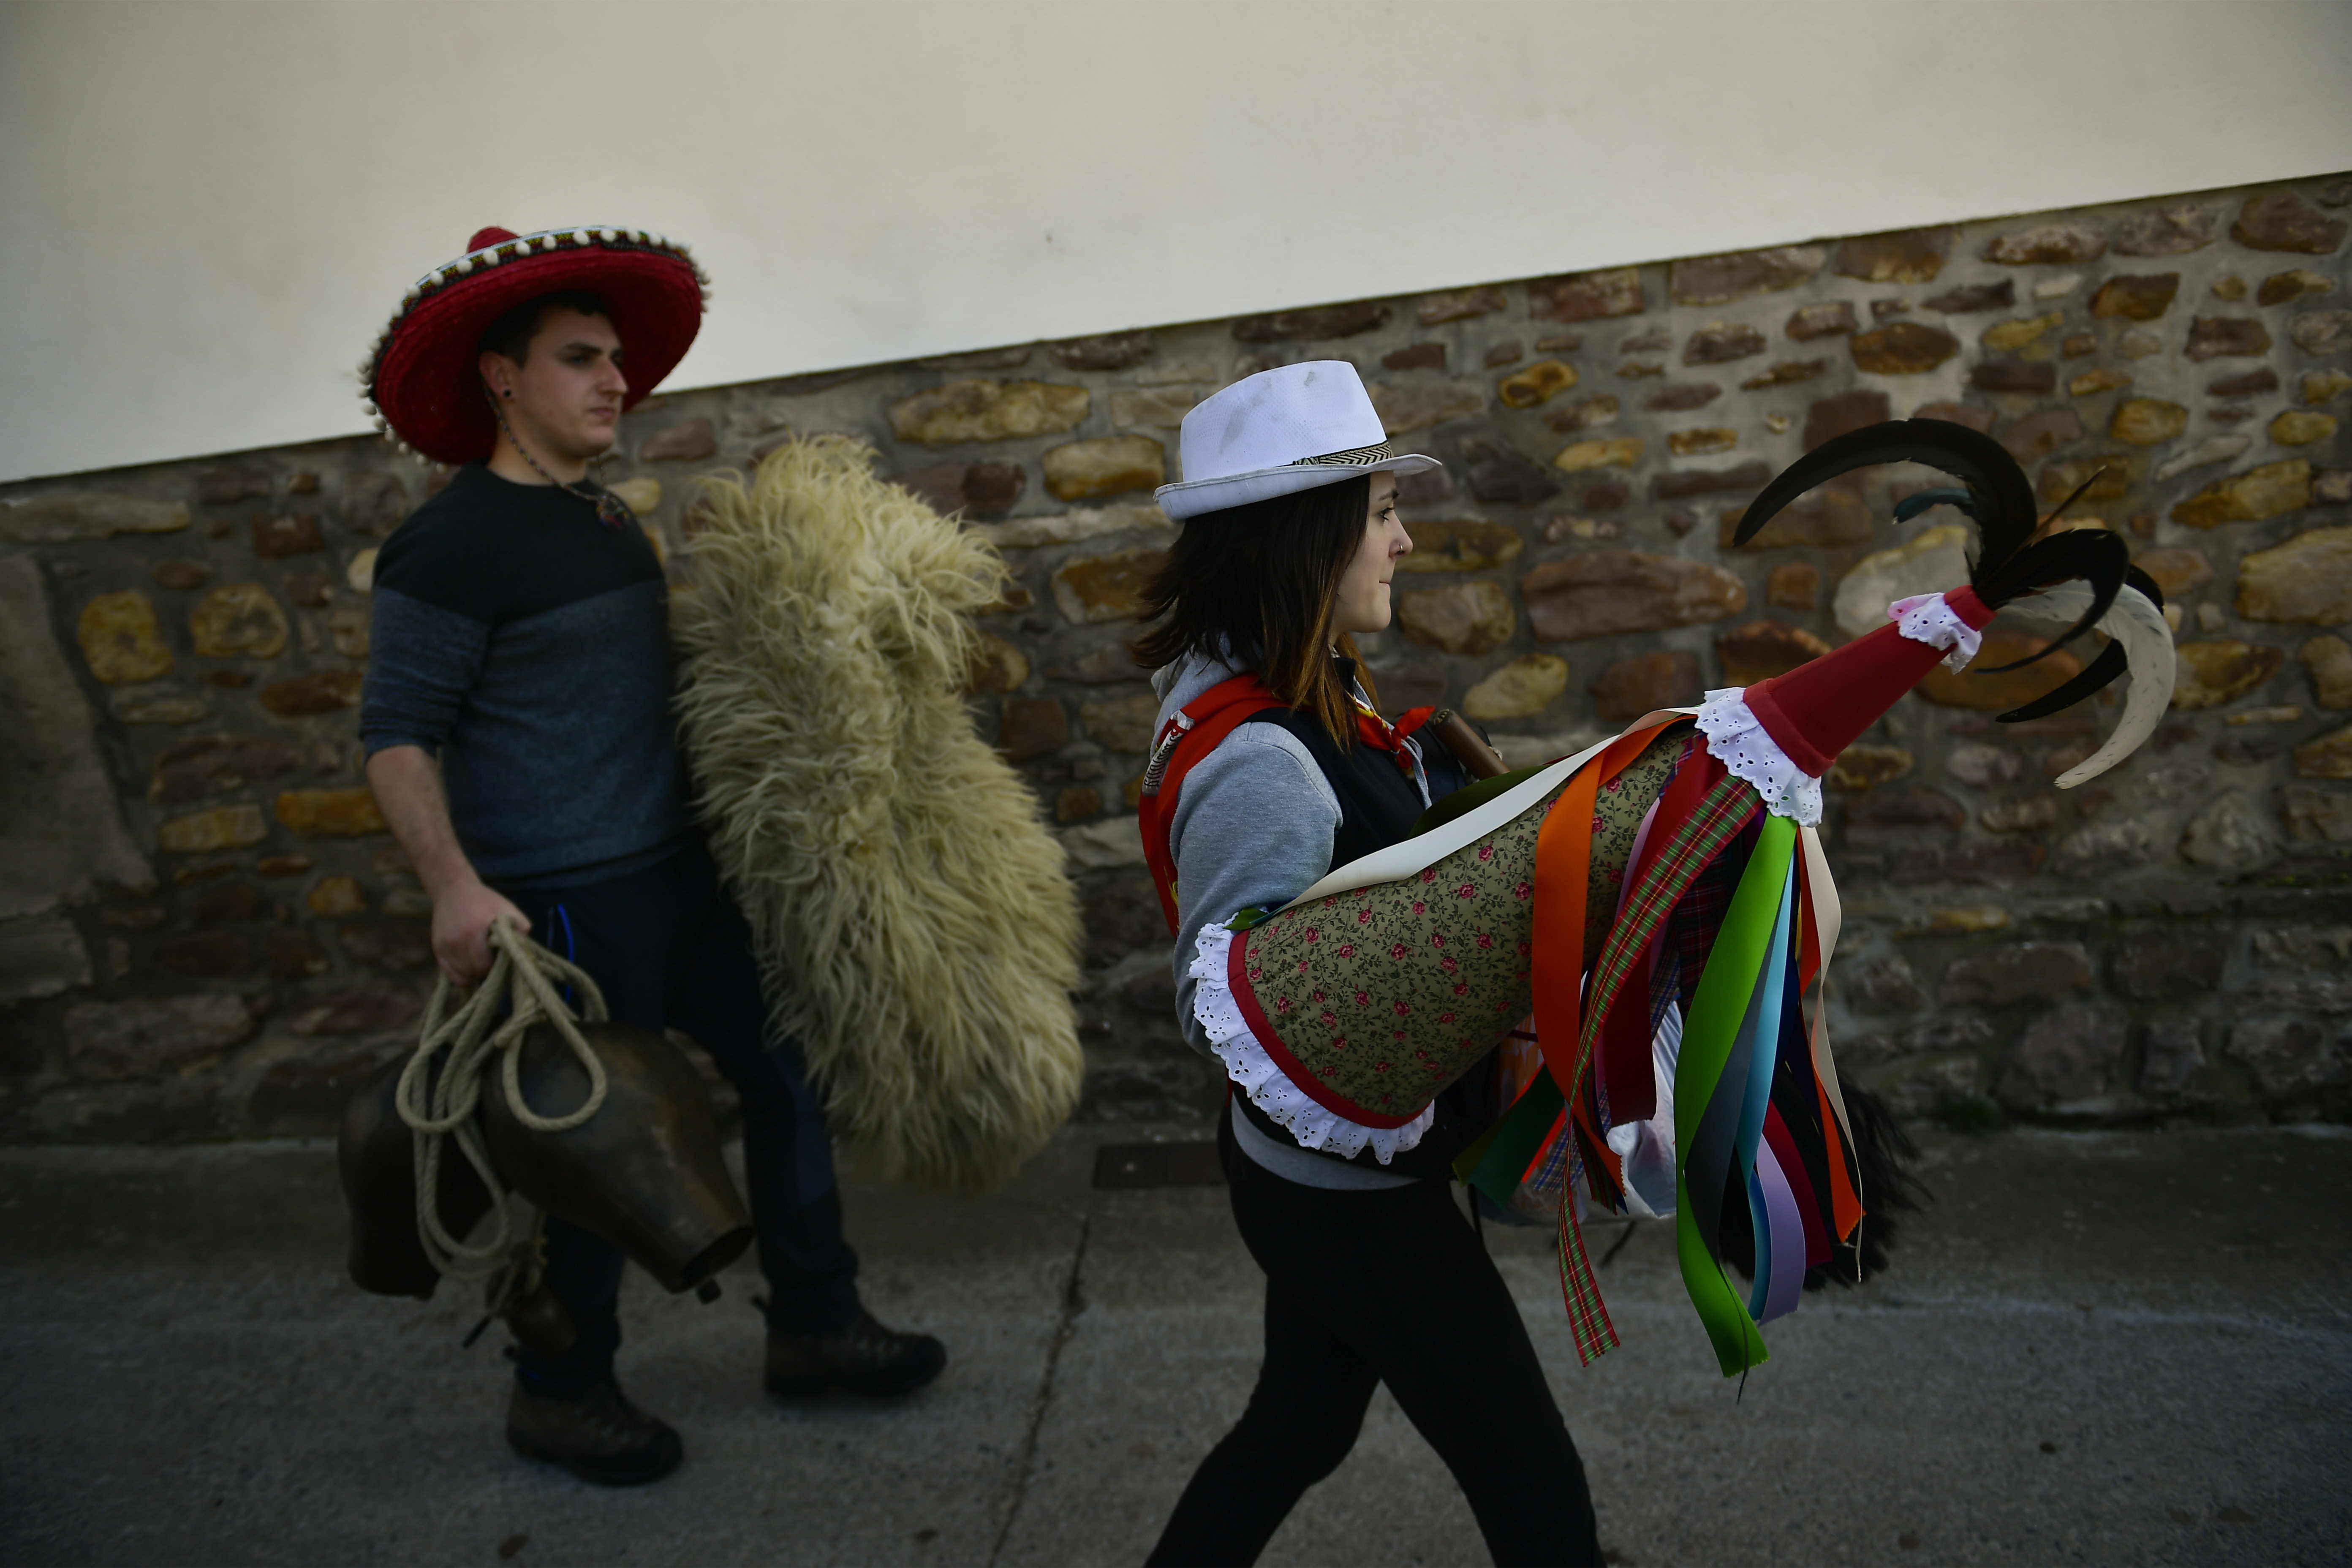 A Joaldunaks called Zanpantzar, prepares to takes part in the Carnival between the Pyrenees villages of Ituren and Zubieta, northern Spain, Monday, Jan. 29, 2018. In one of the most ancient carnivals in Europe, dating from before the Roman empire, companies of Joaldunak (cowbells) made up of residents of two towns, Ituren and Zubieta, parade the streets costumed in sandals, lace petticoats, sheepskins around the waist and shoulders, coloured neckerchiefs, conical caps with ribbons and a hyssop of horsehair in their right hands and cowbells hung across their lower back. (AP Photo/Alvaro Barrientos)